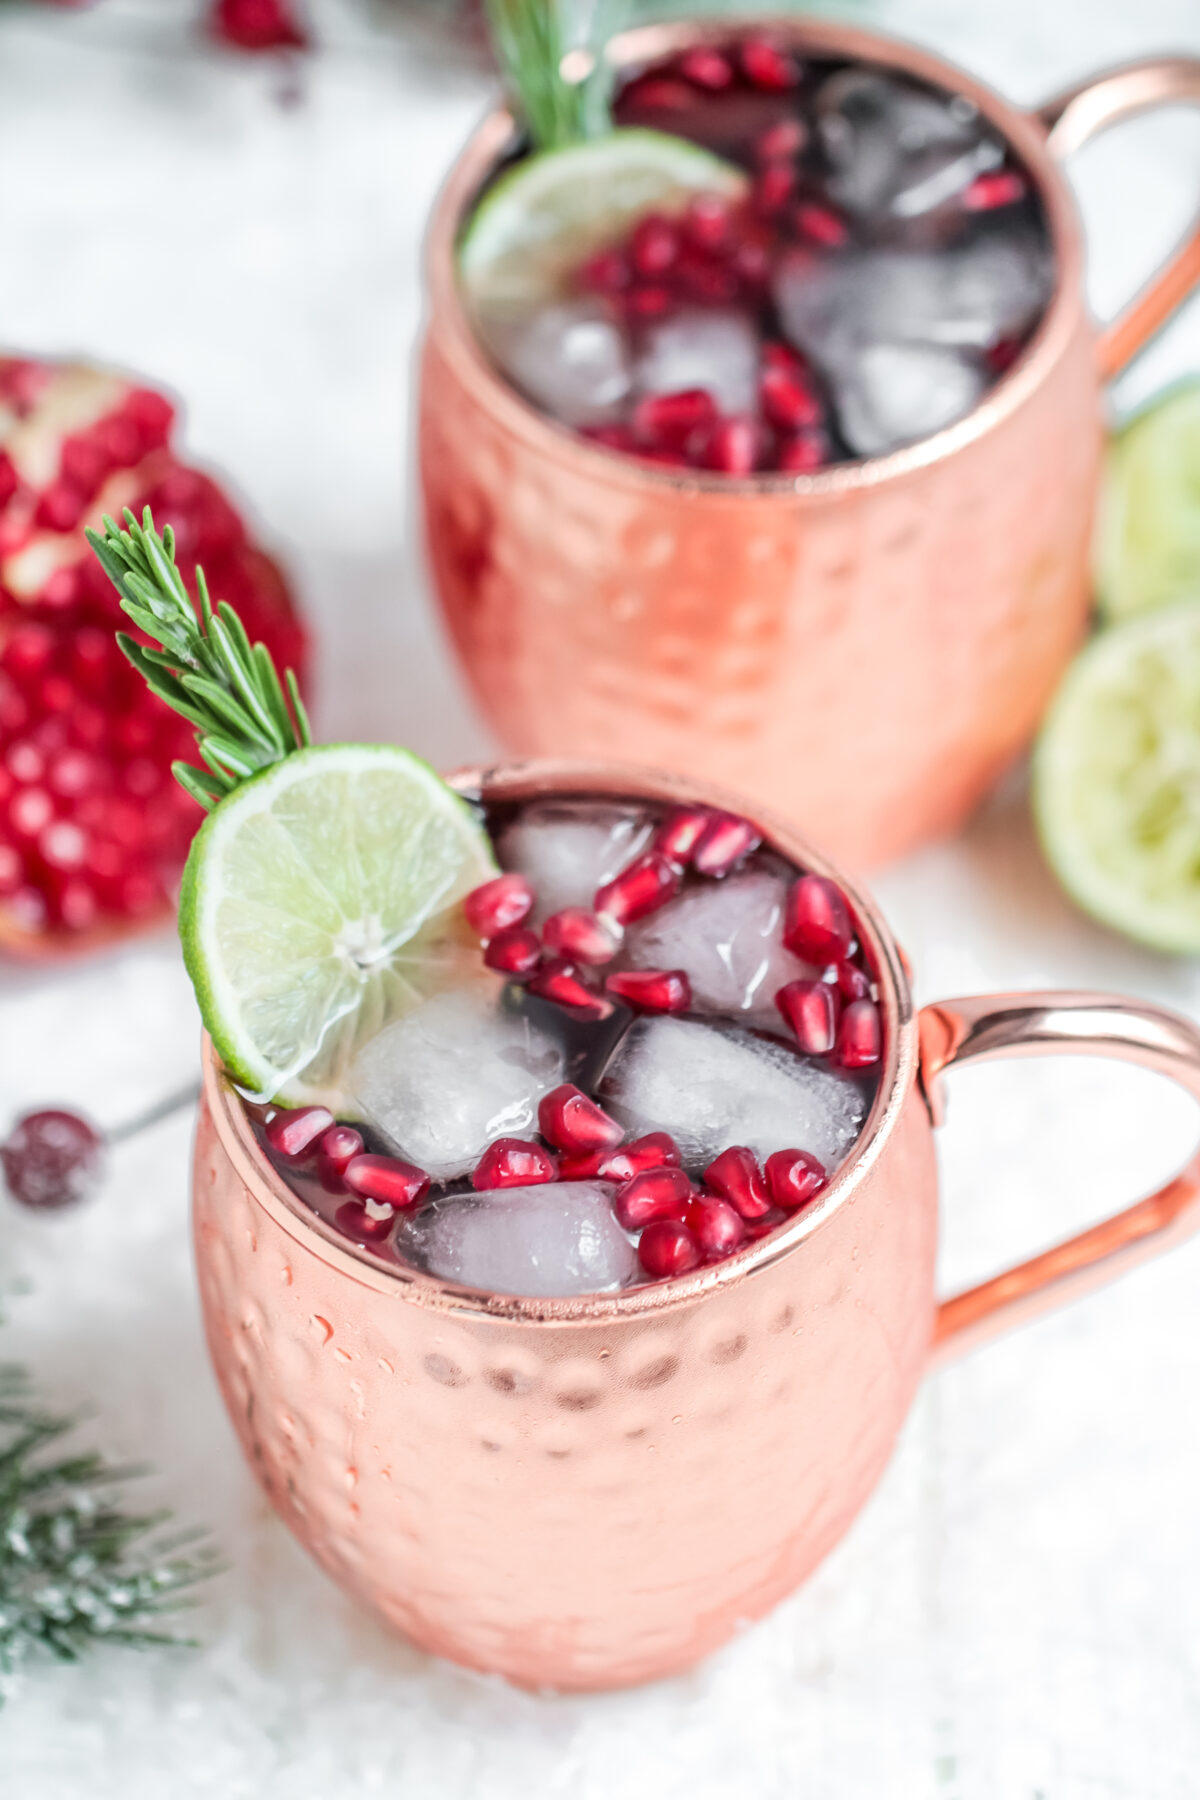 Looking for a festive drink to serve at your Christmas party? This pomegranate Moscow mule recipe is a perfect holiday cocktail!